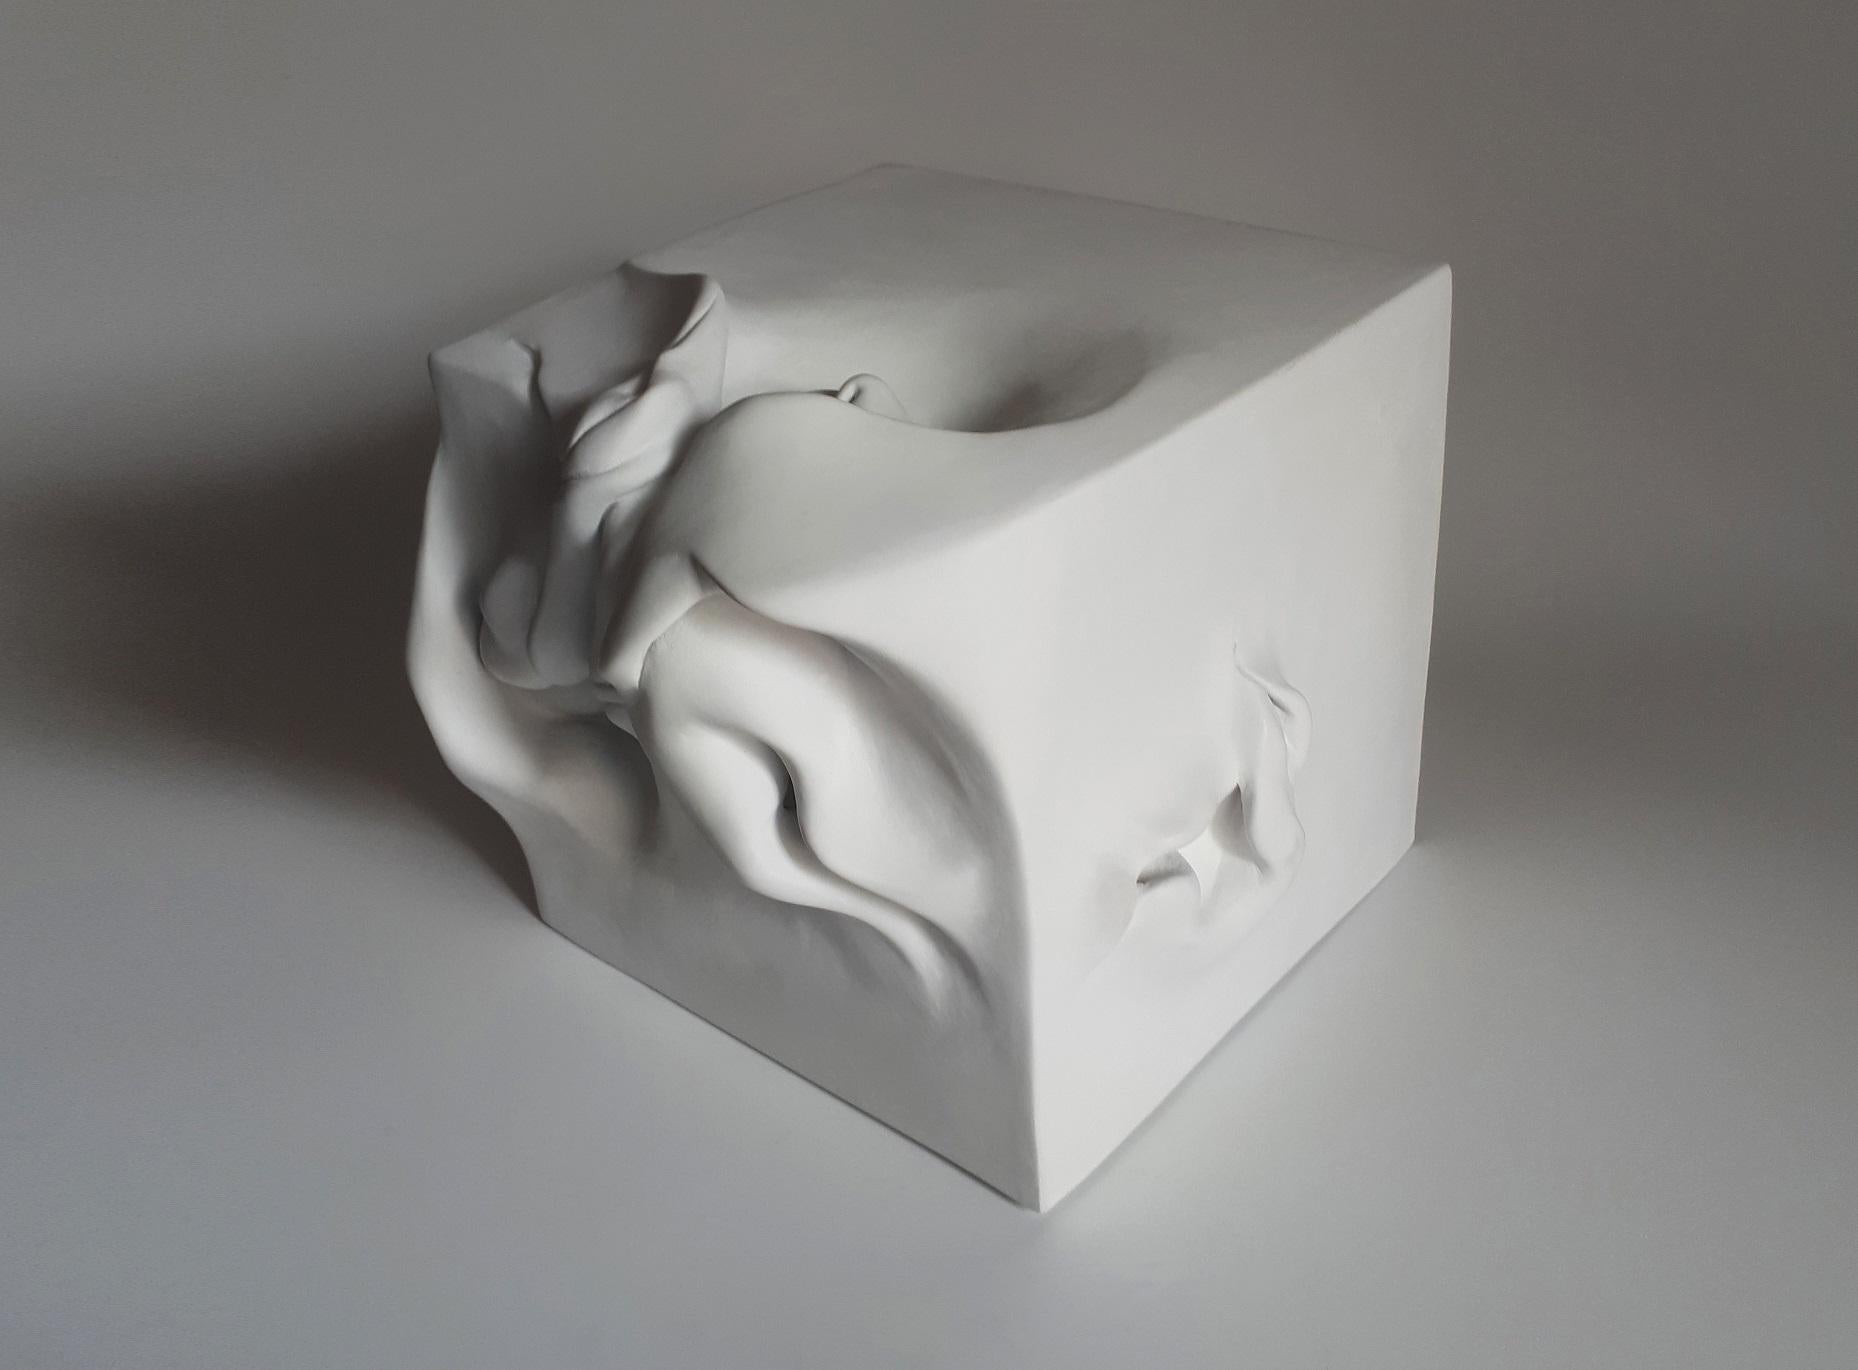 Cube 1 is a unique sculpture by contemporary artist Sharon Brill. This sculpture is made of painted fired clay, dimensions are 19 × 20 × 21 cm
(7.5 × 7.9 × 8.3 in).

Sharon Brill’s production is made of pieces whose aesthetics is marked and